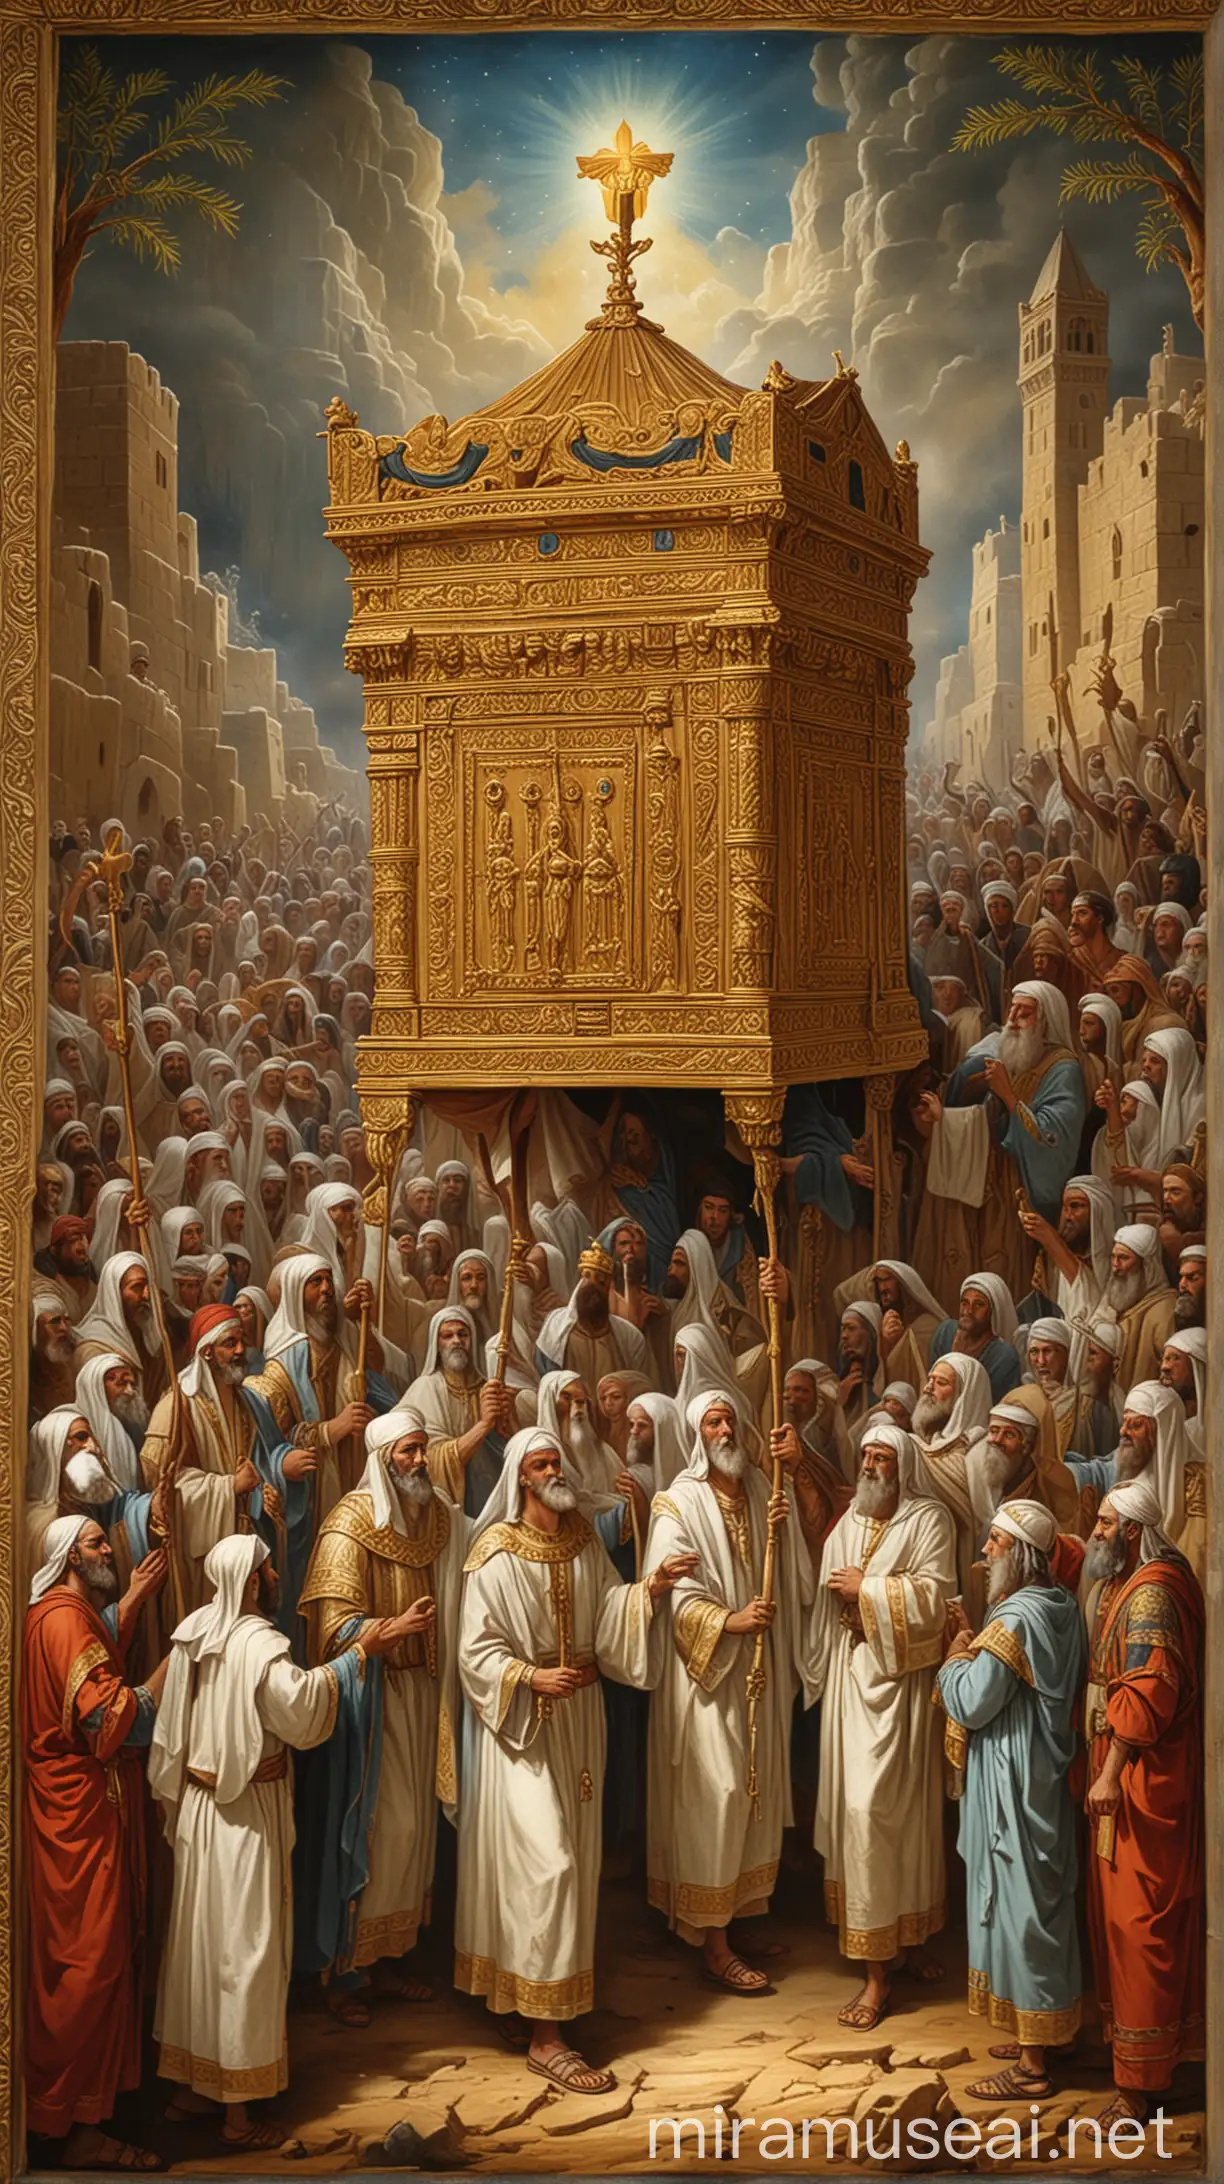 A historical scene depicting the Ark of the Covenant being carried from the house of Obed-Edom, with King David leading the procession. The Ark, ornate and glowing, is borne by men in ancient attire."